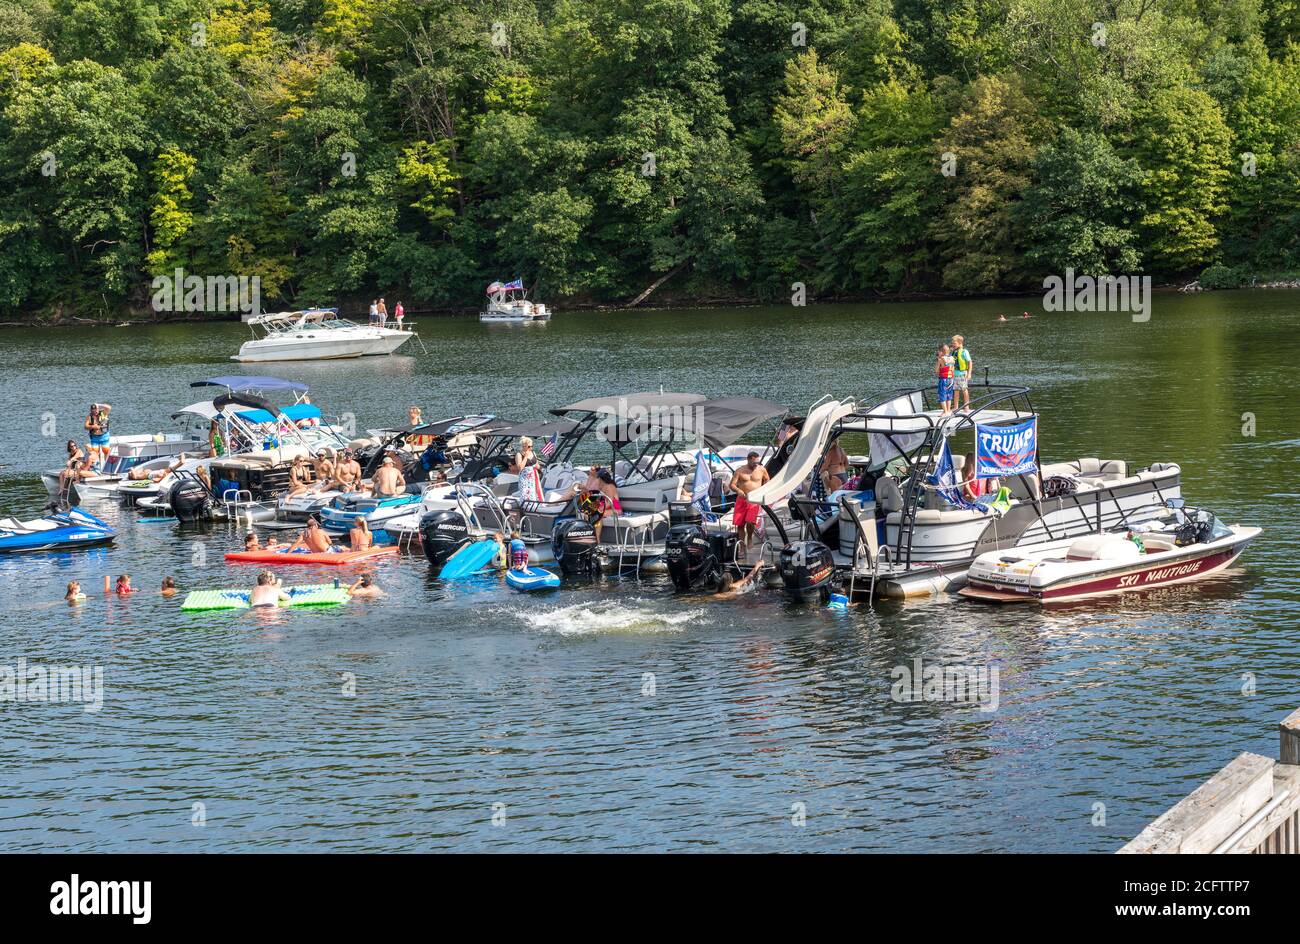 Morgantown, WV - 7 September 2020: Trump supporters party on Cheat Lake to celebrate Labor Day in large group Stock Photo